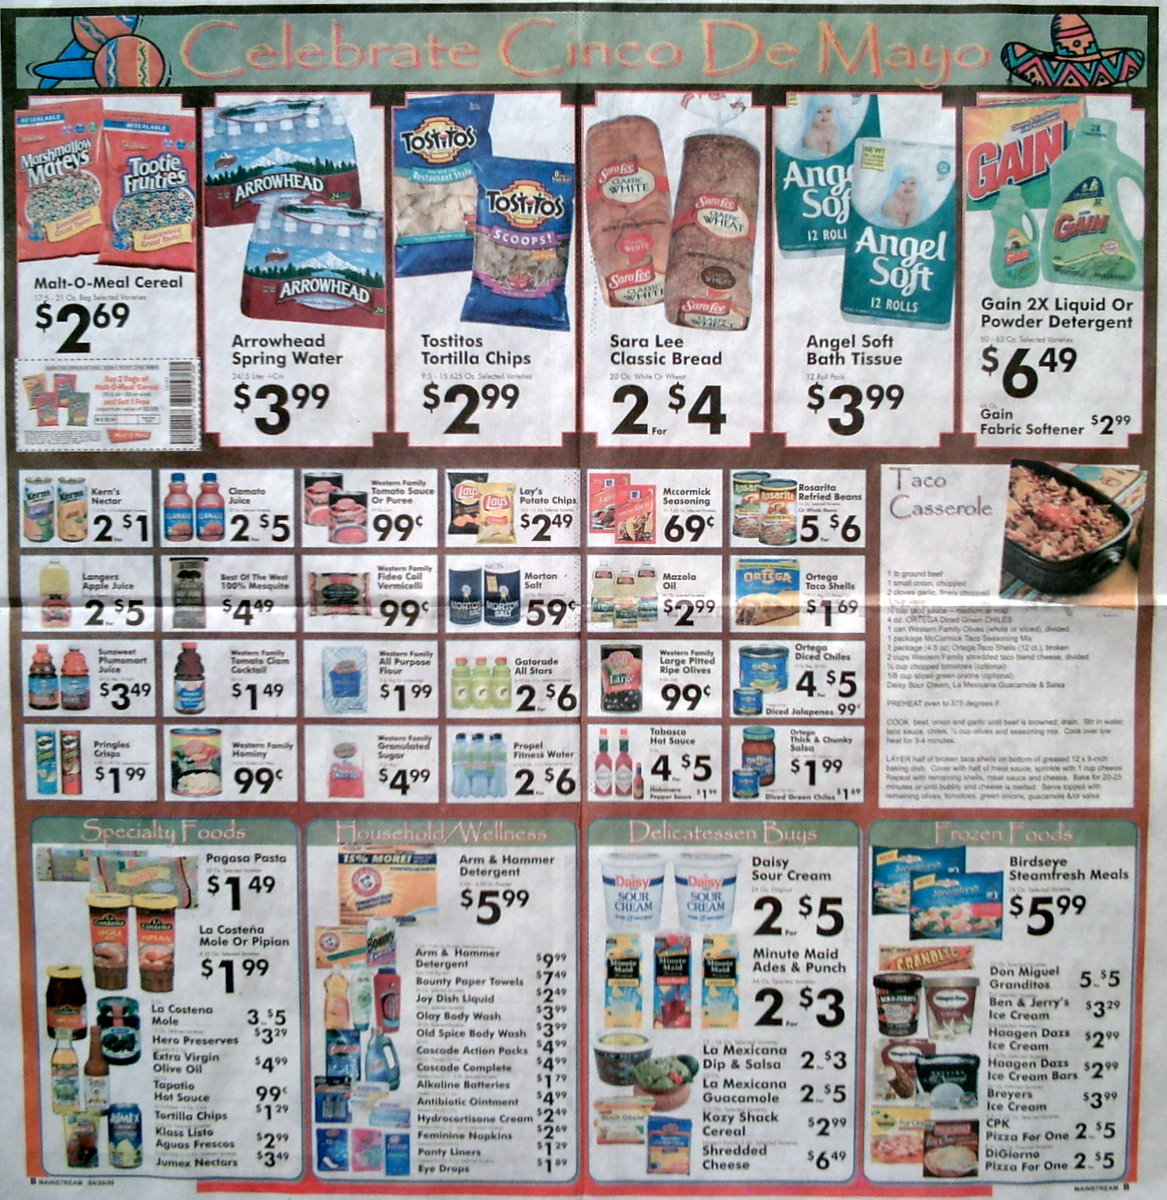 Big Trees Market Weekly Ad for April 29 - May 5th, 2009